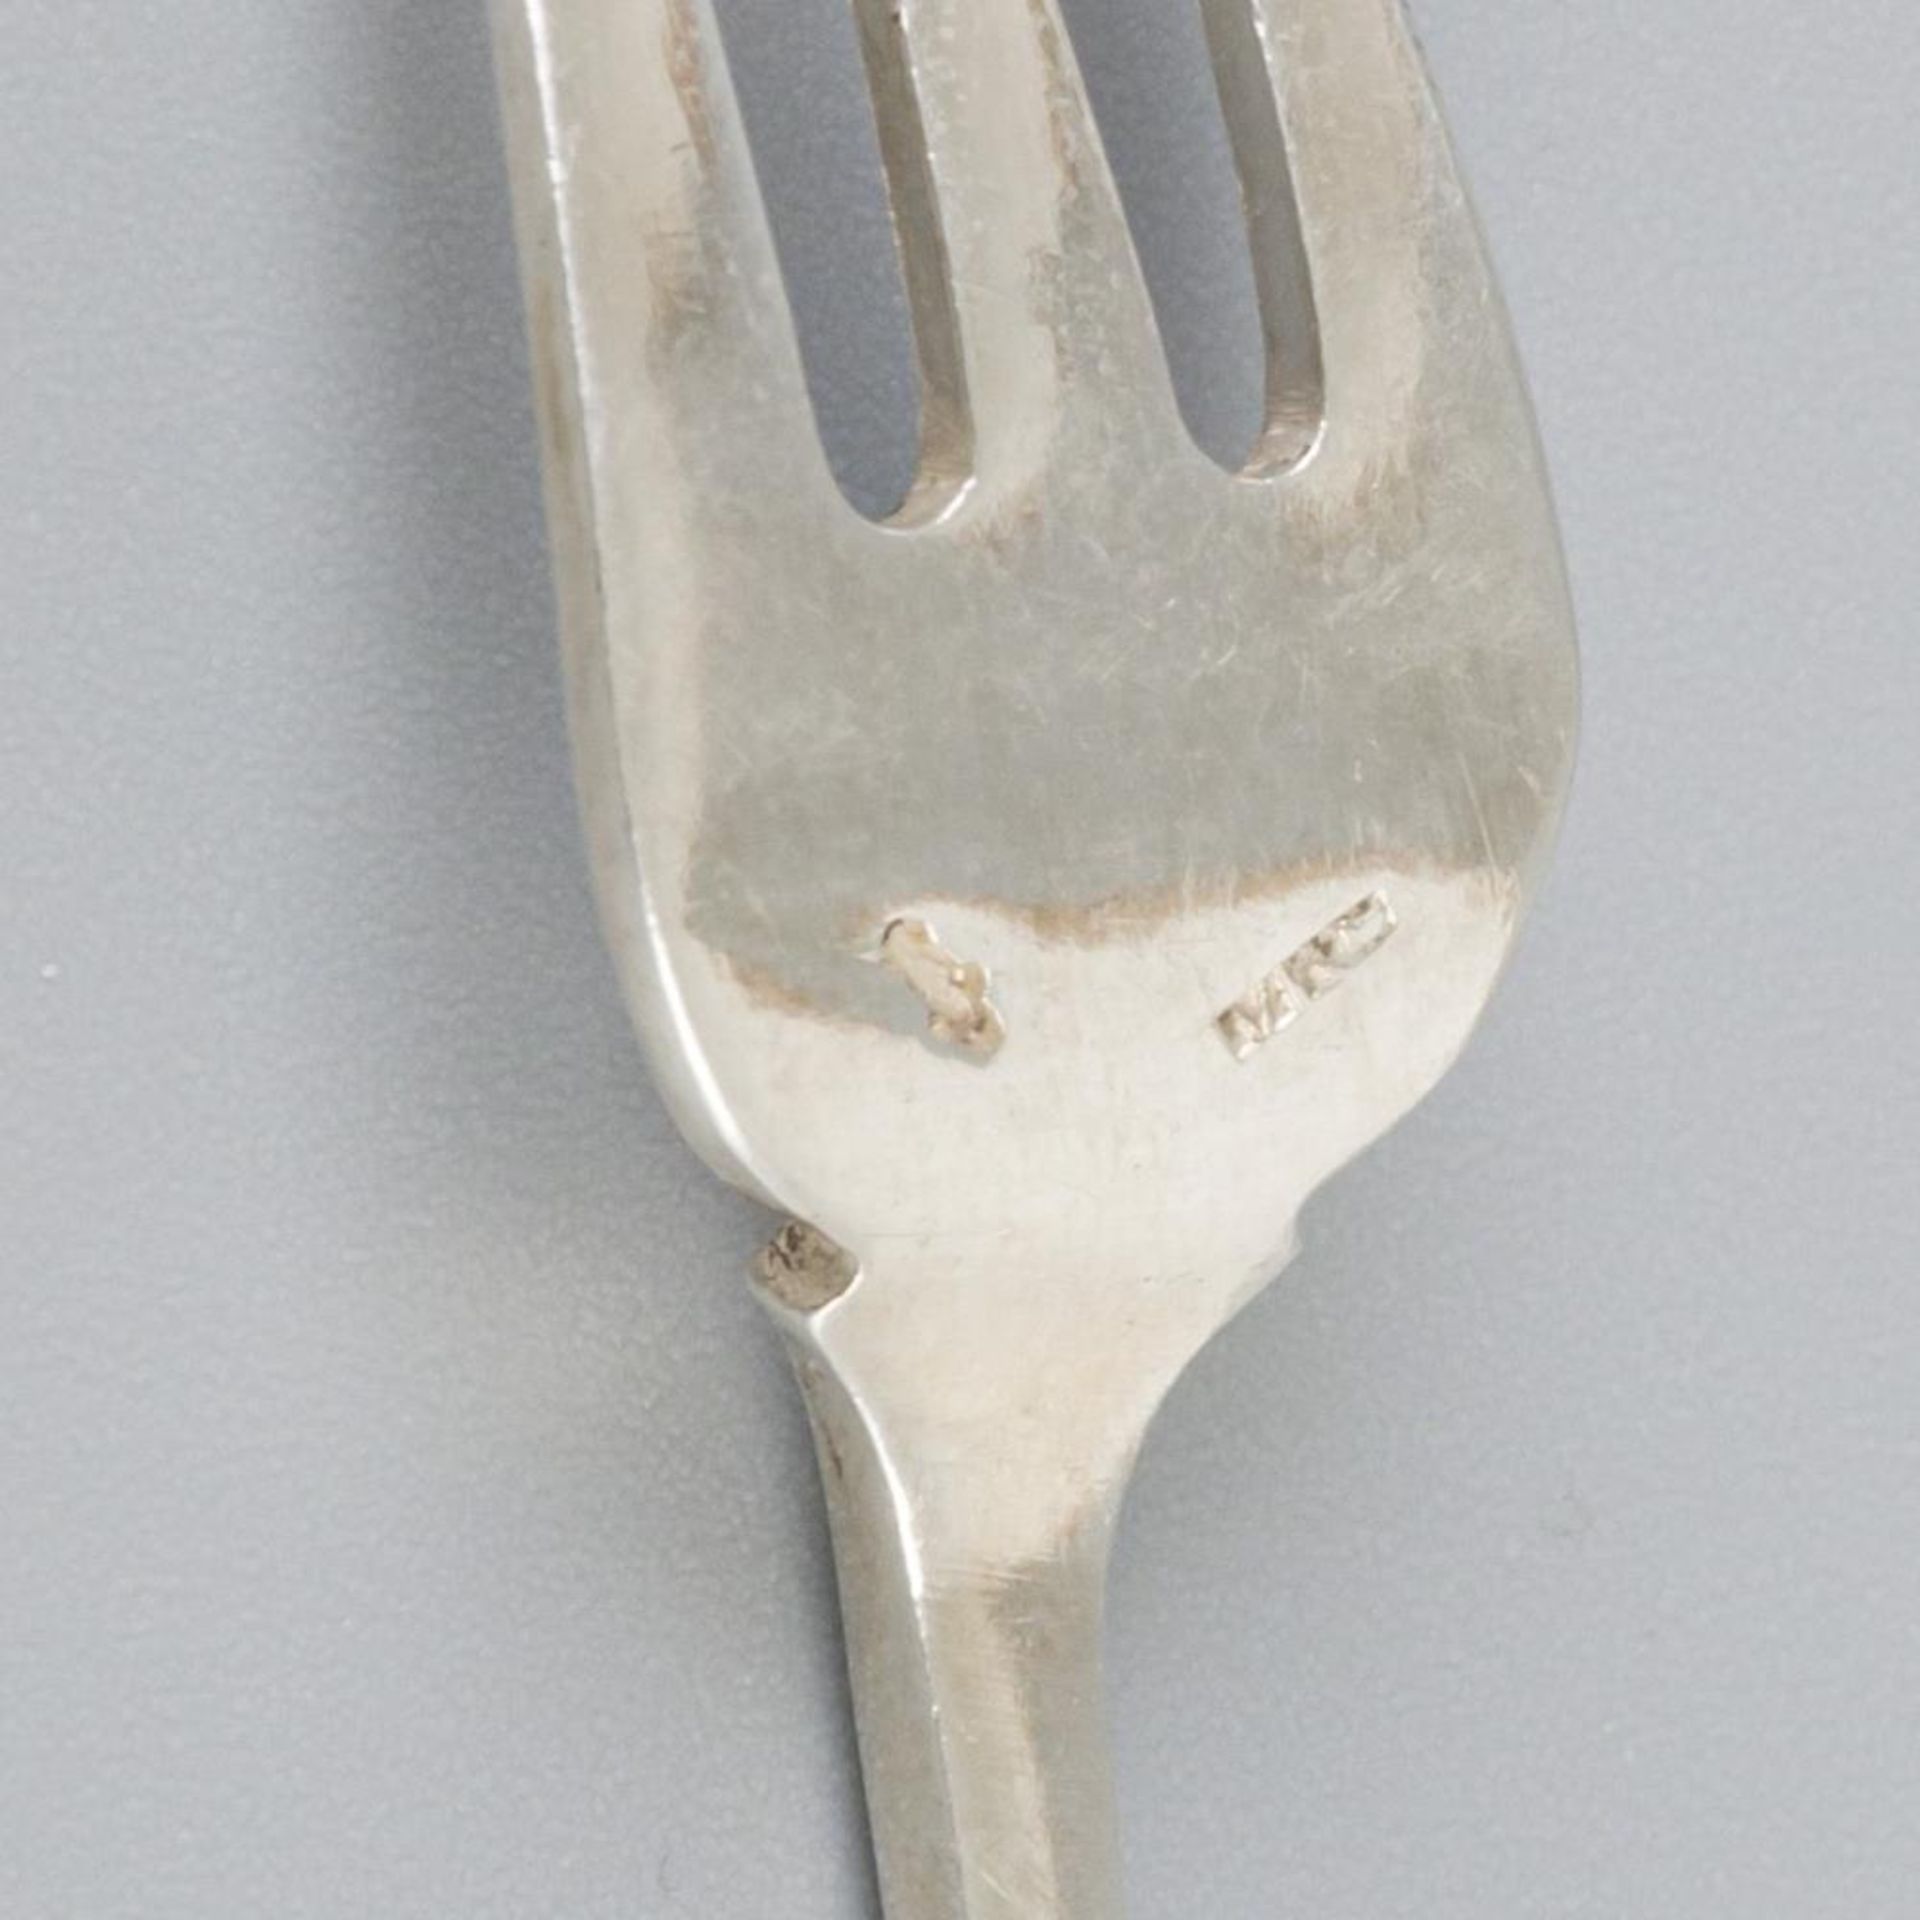 12 piece set silver pastry forks. - Image 6 of 6